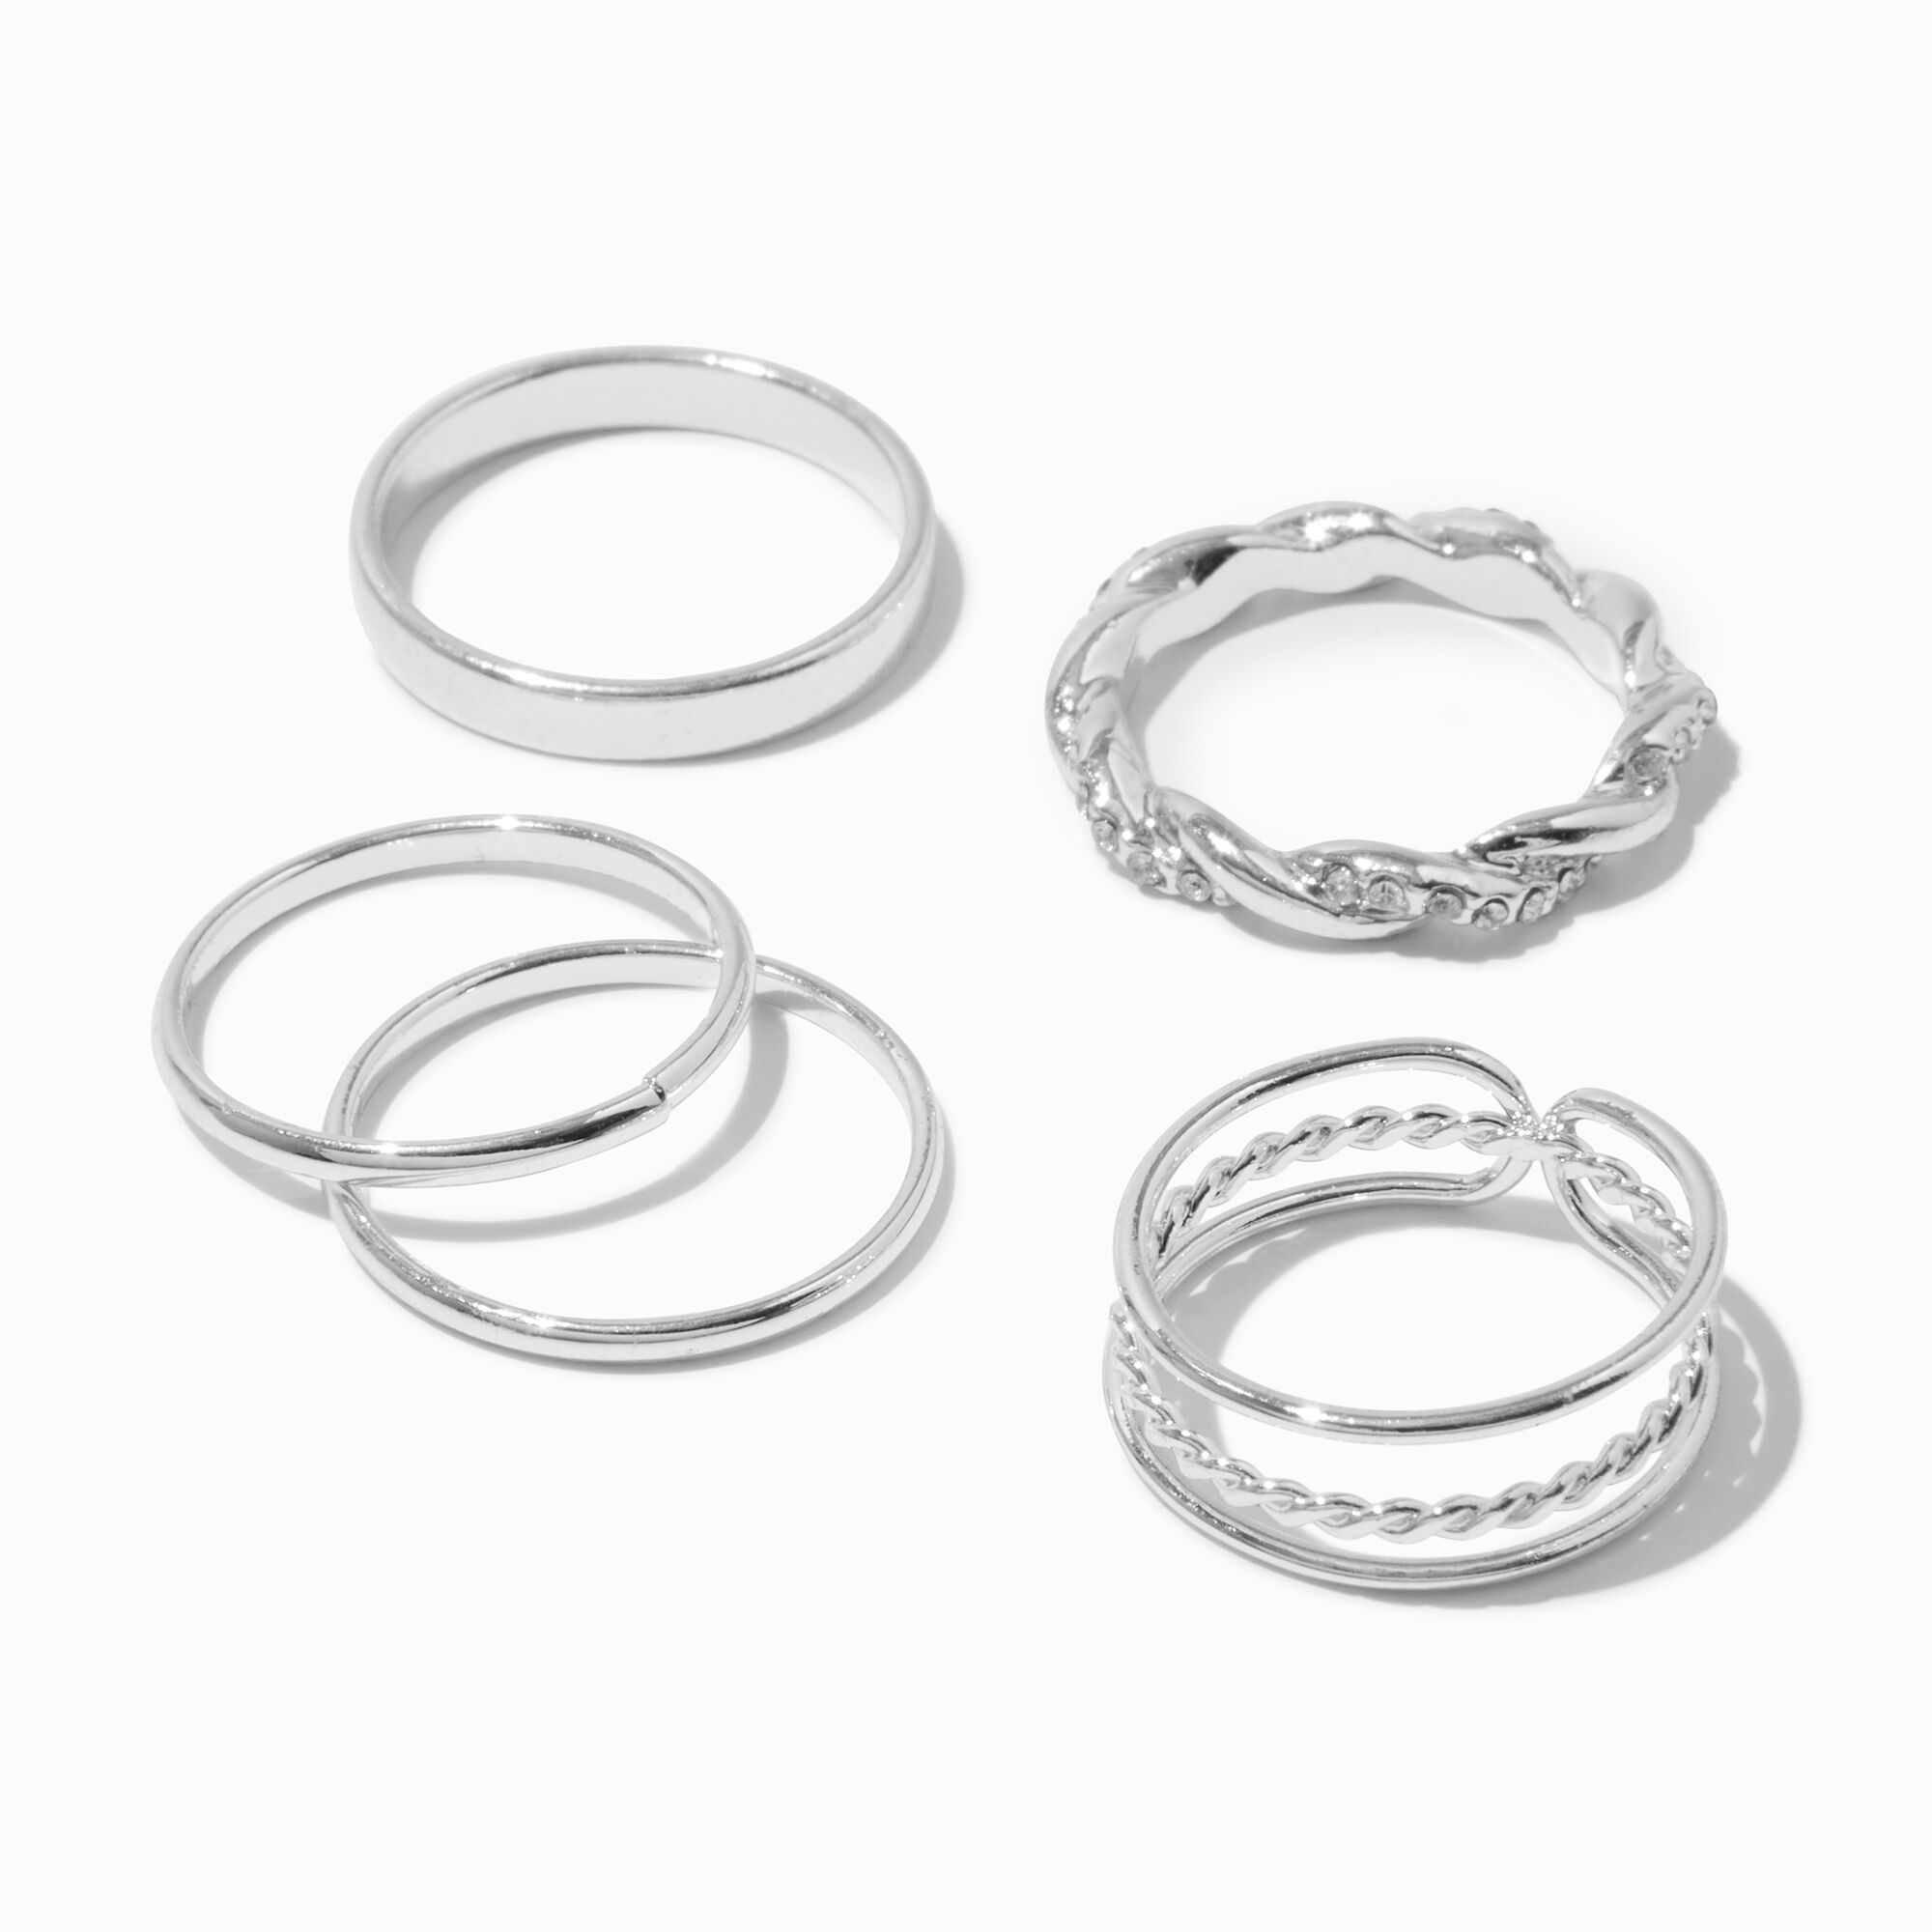 View Claires Tone Twisted Geometric Rings 5 Pack Silver information